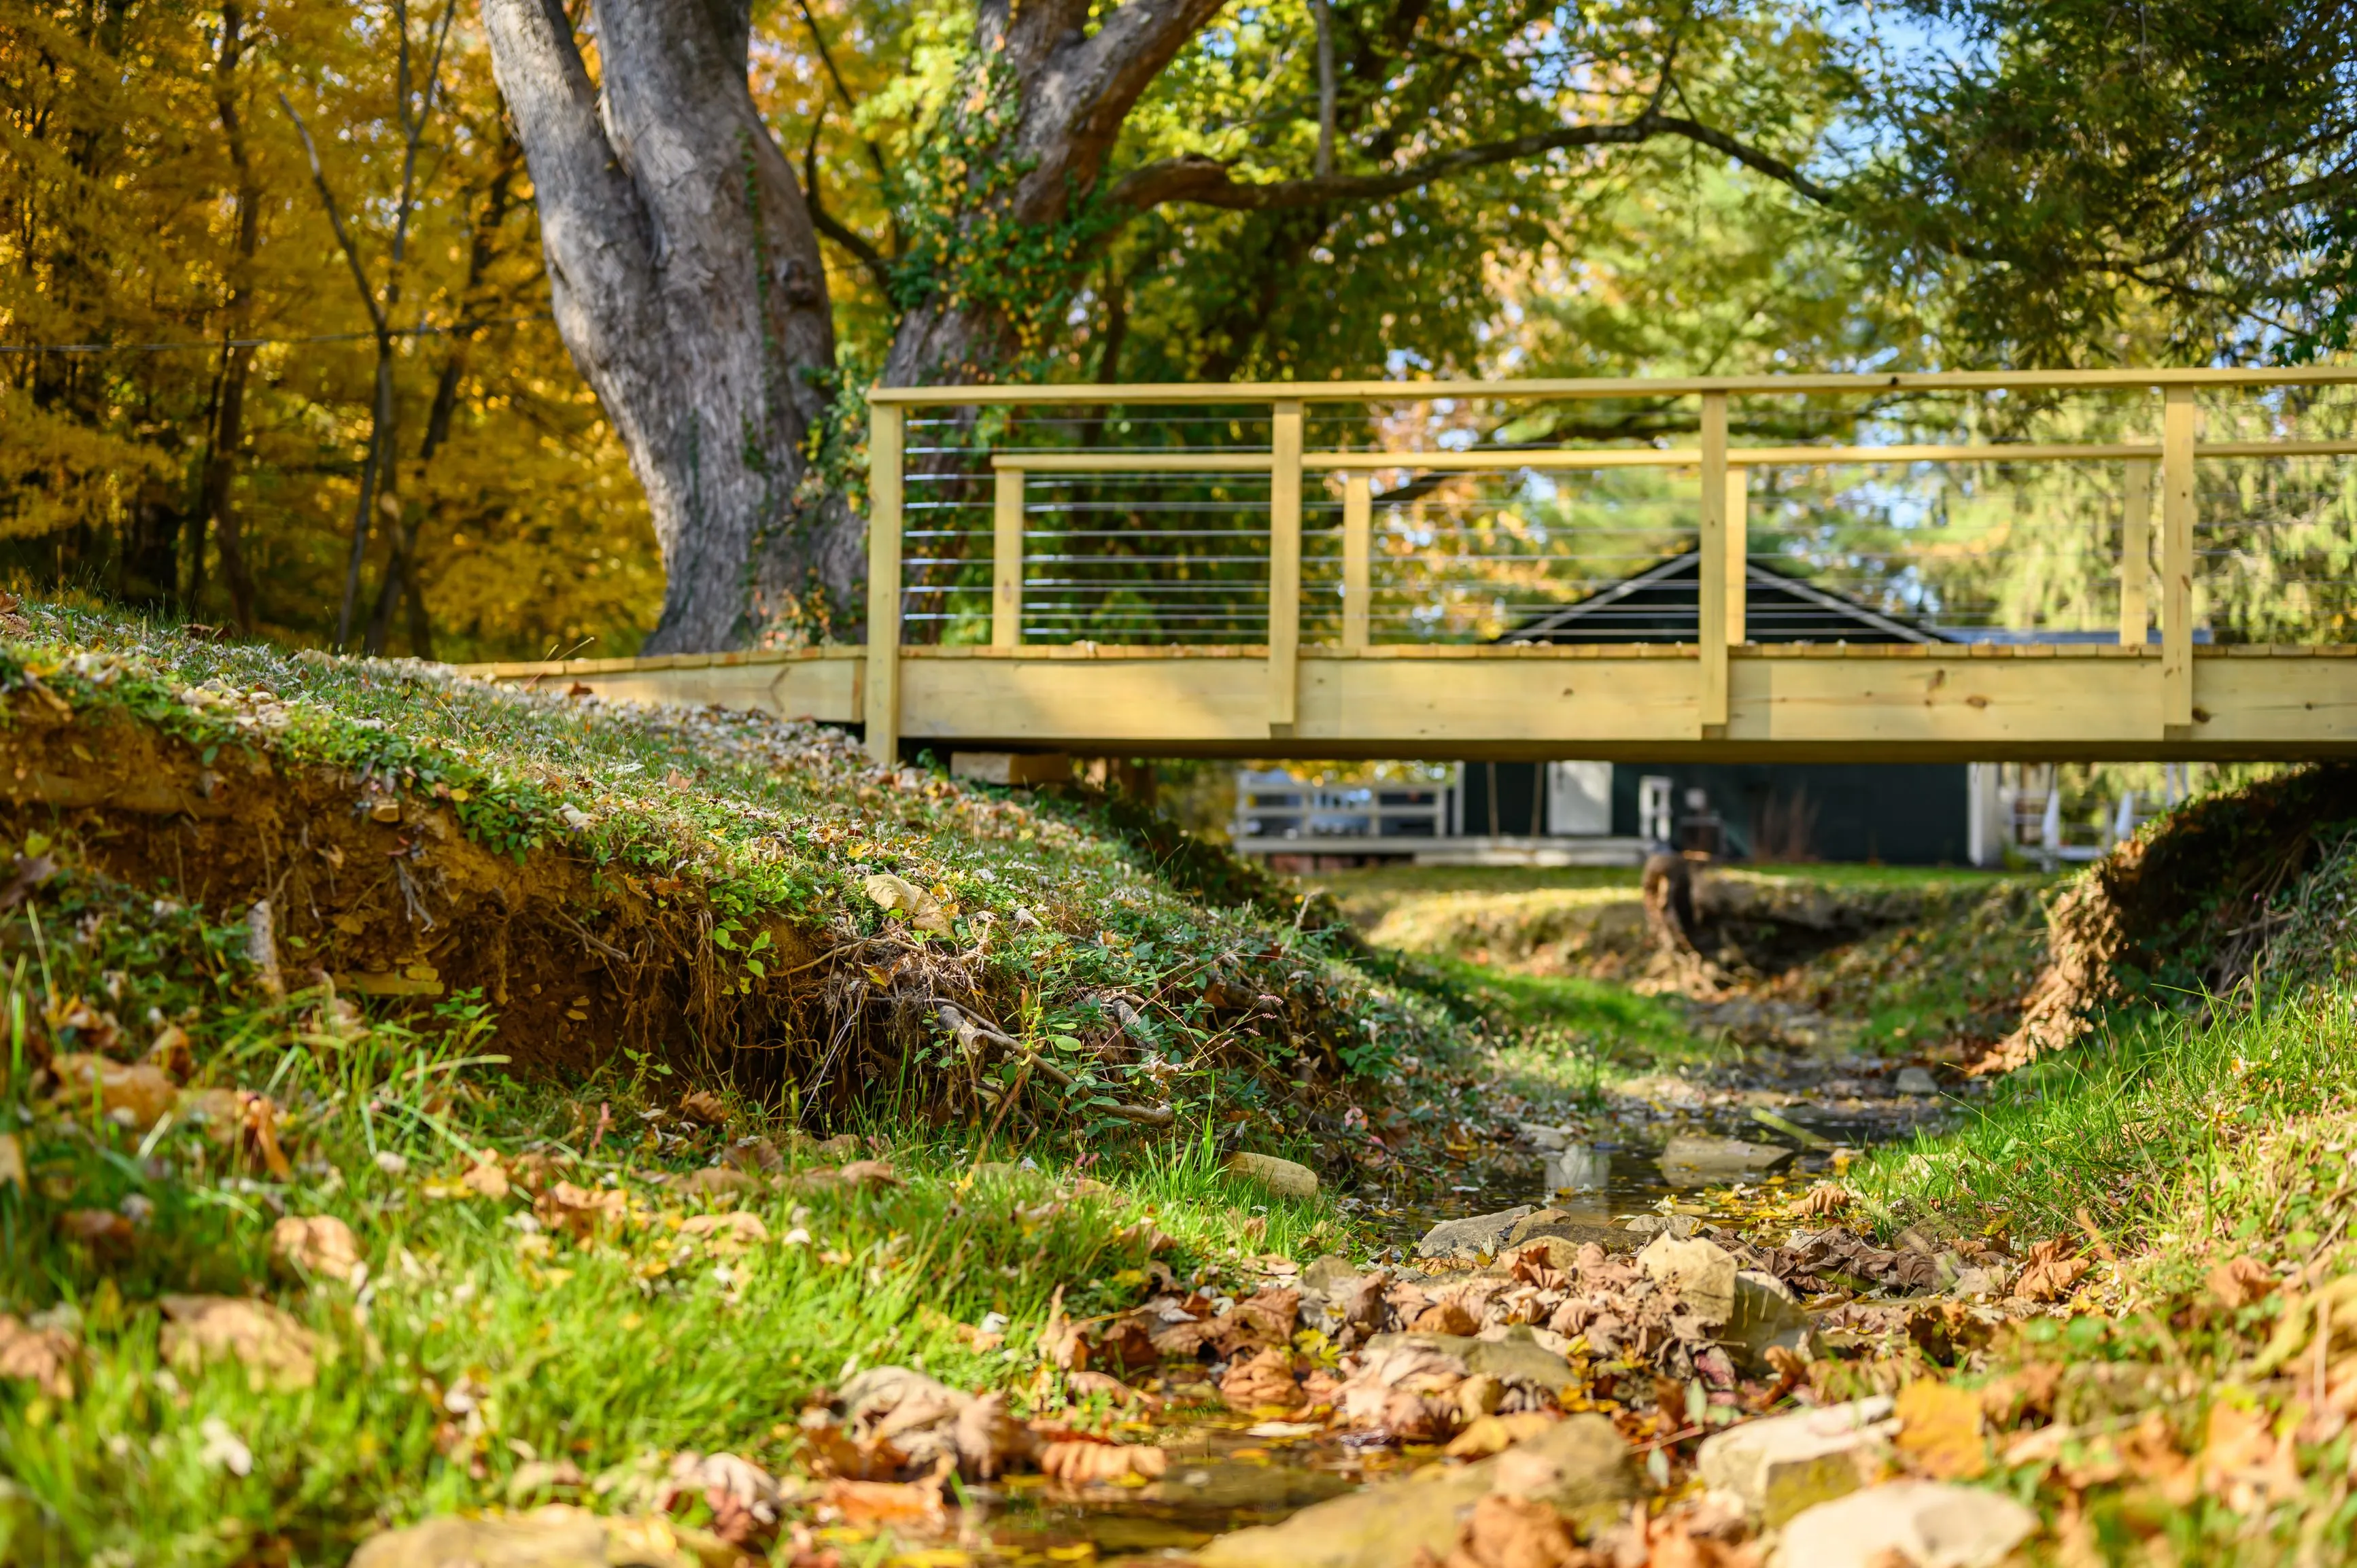 A wooden bridge over a small creek surrounded by autumn foliage in a park setting.